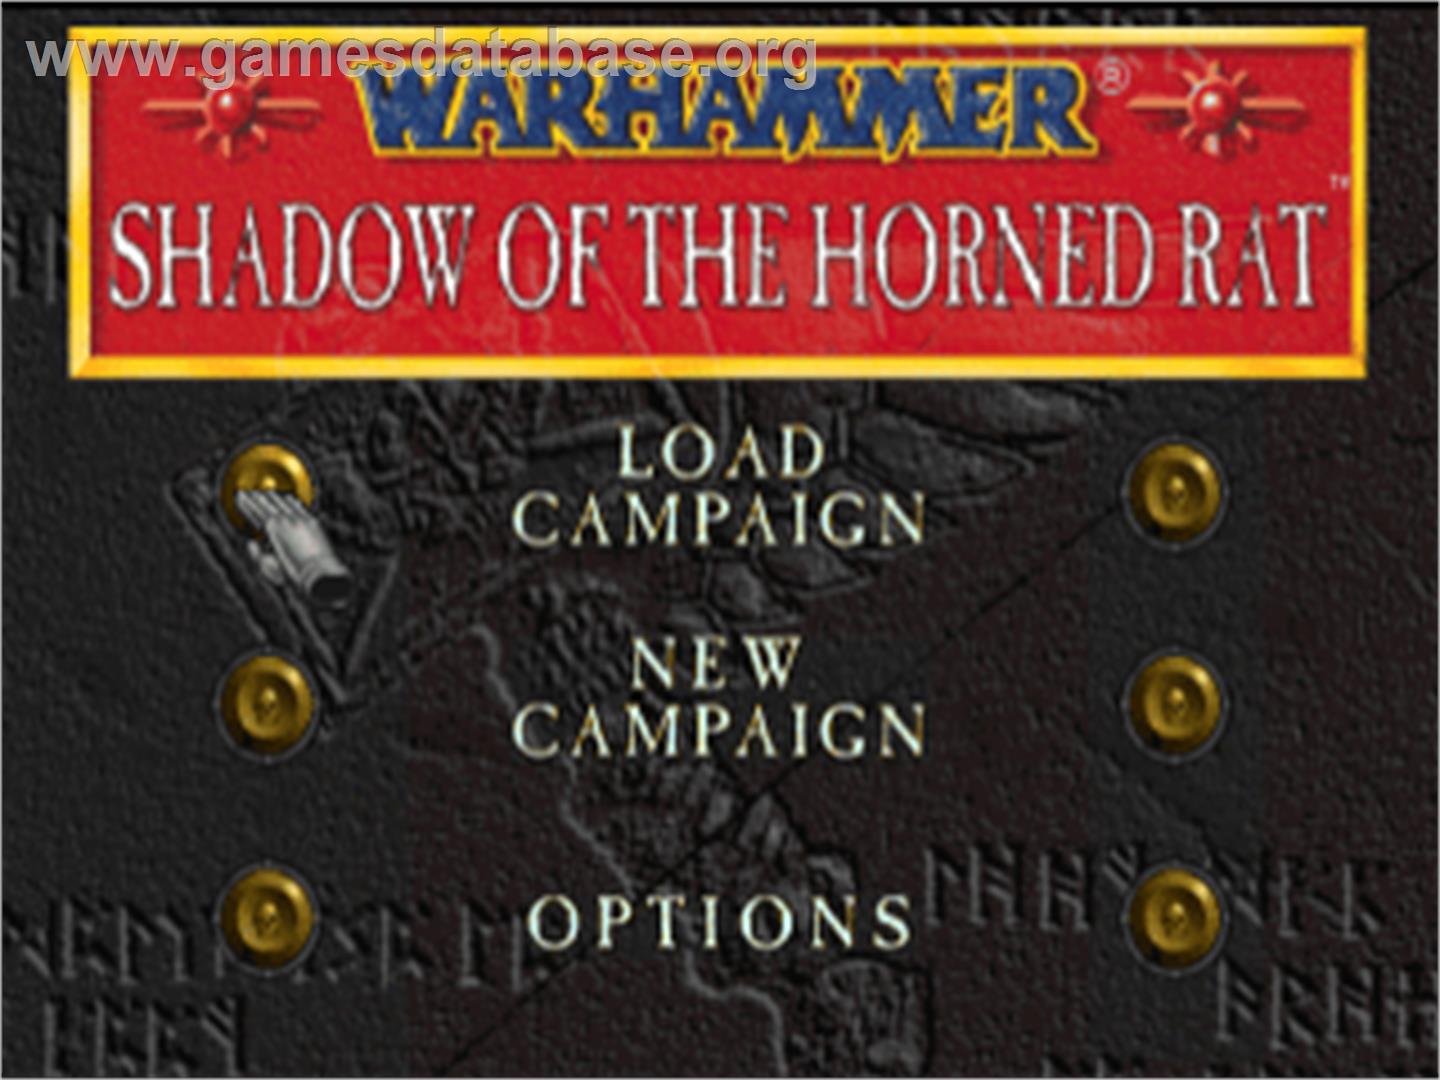 Warhammer: Shadow of the Horned Rat - Sony Playstation - Artwork - Title Screen